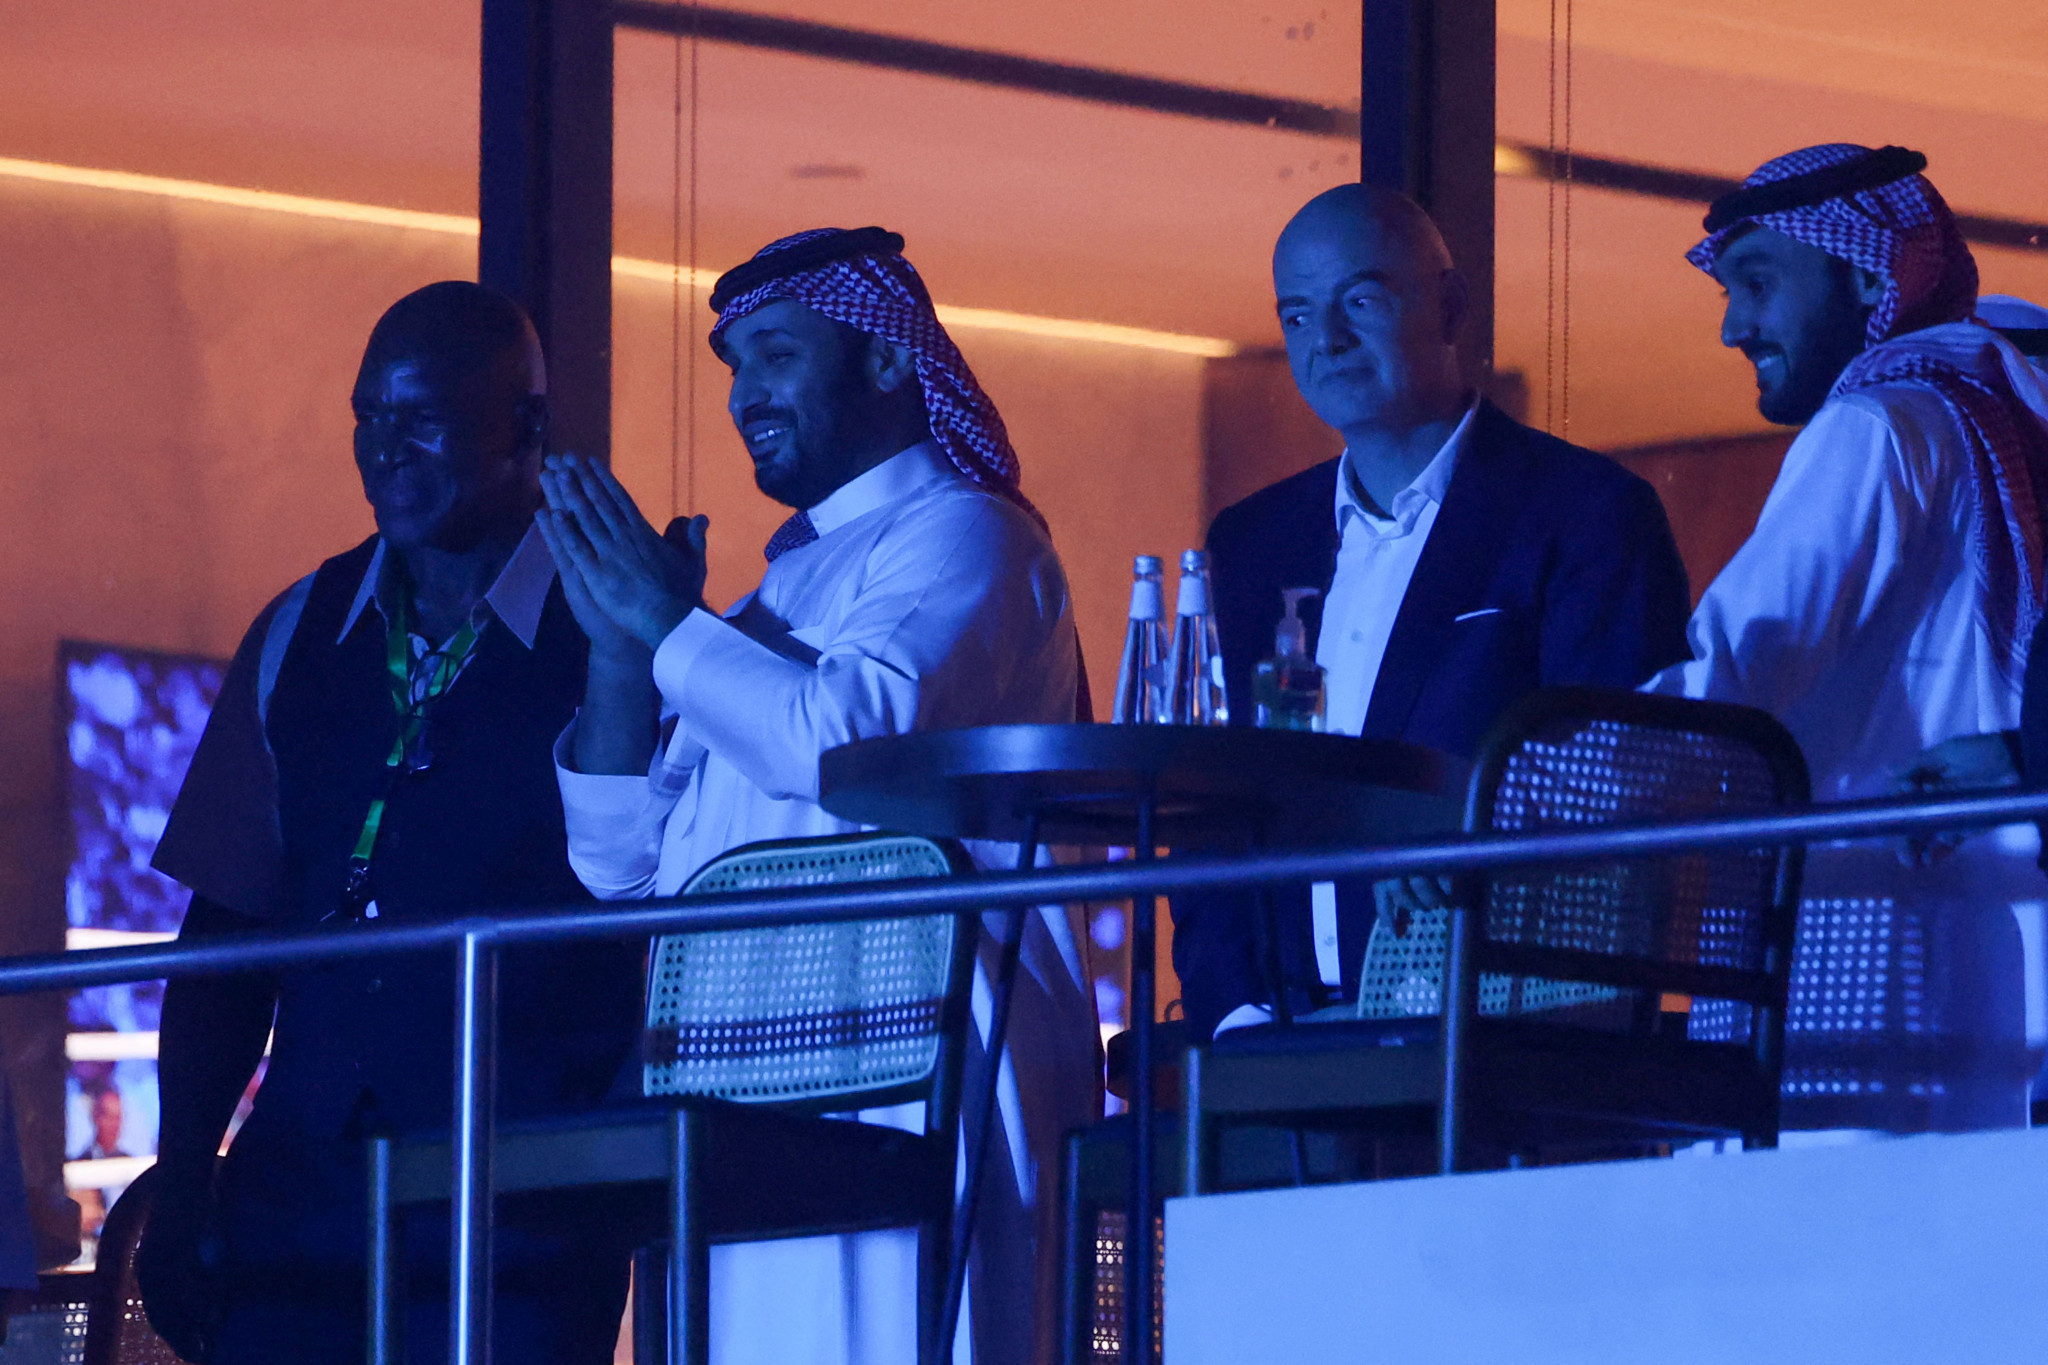 Saudi Arabia is targeting the 2030 FIFA World Cup, and Crown Prince Mohammed bin Salman Al Saud, second left, appears to enjoy cordial relations with FIFA President Gianni Infantino, second right ©Getty Images